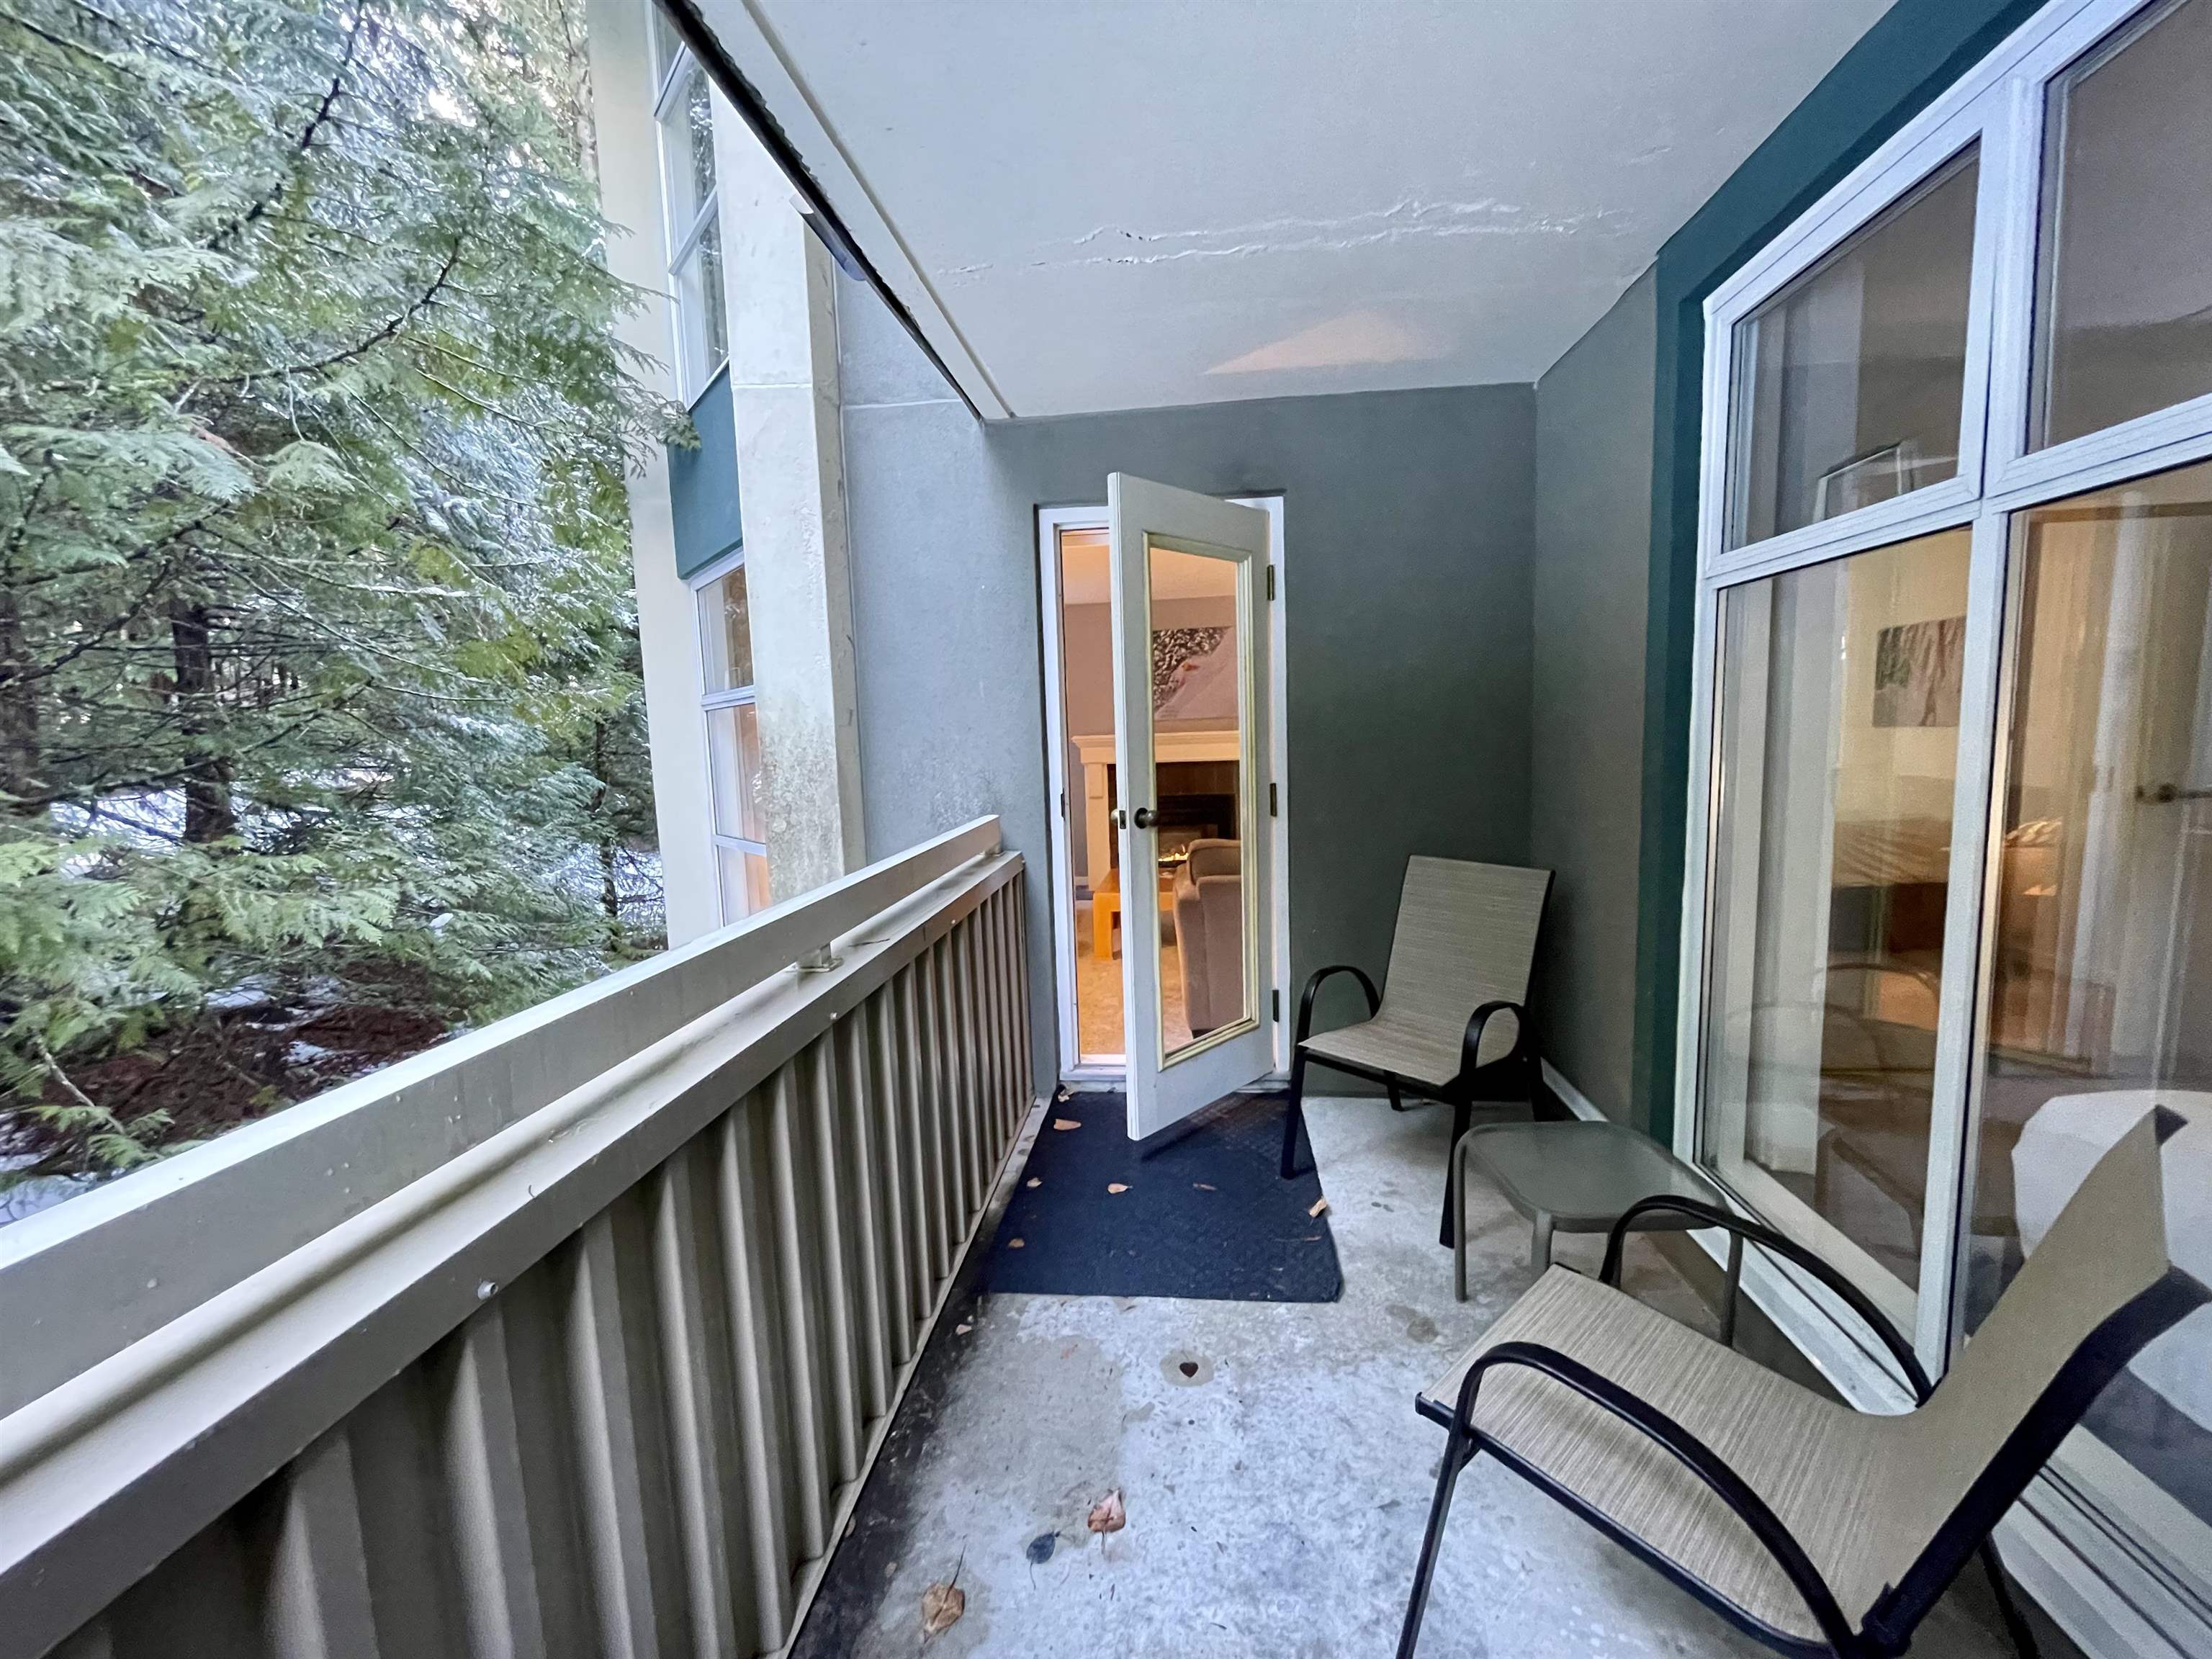 Listing image of 420 Wk13-4910 SPEARHEAD PLACE